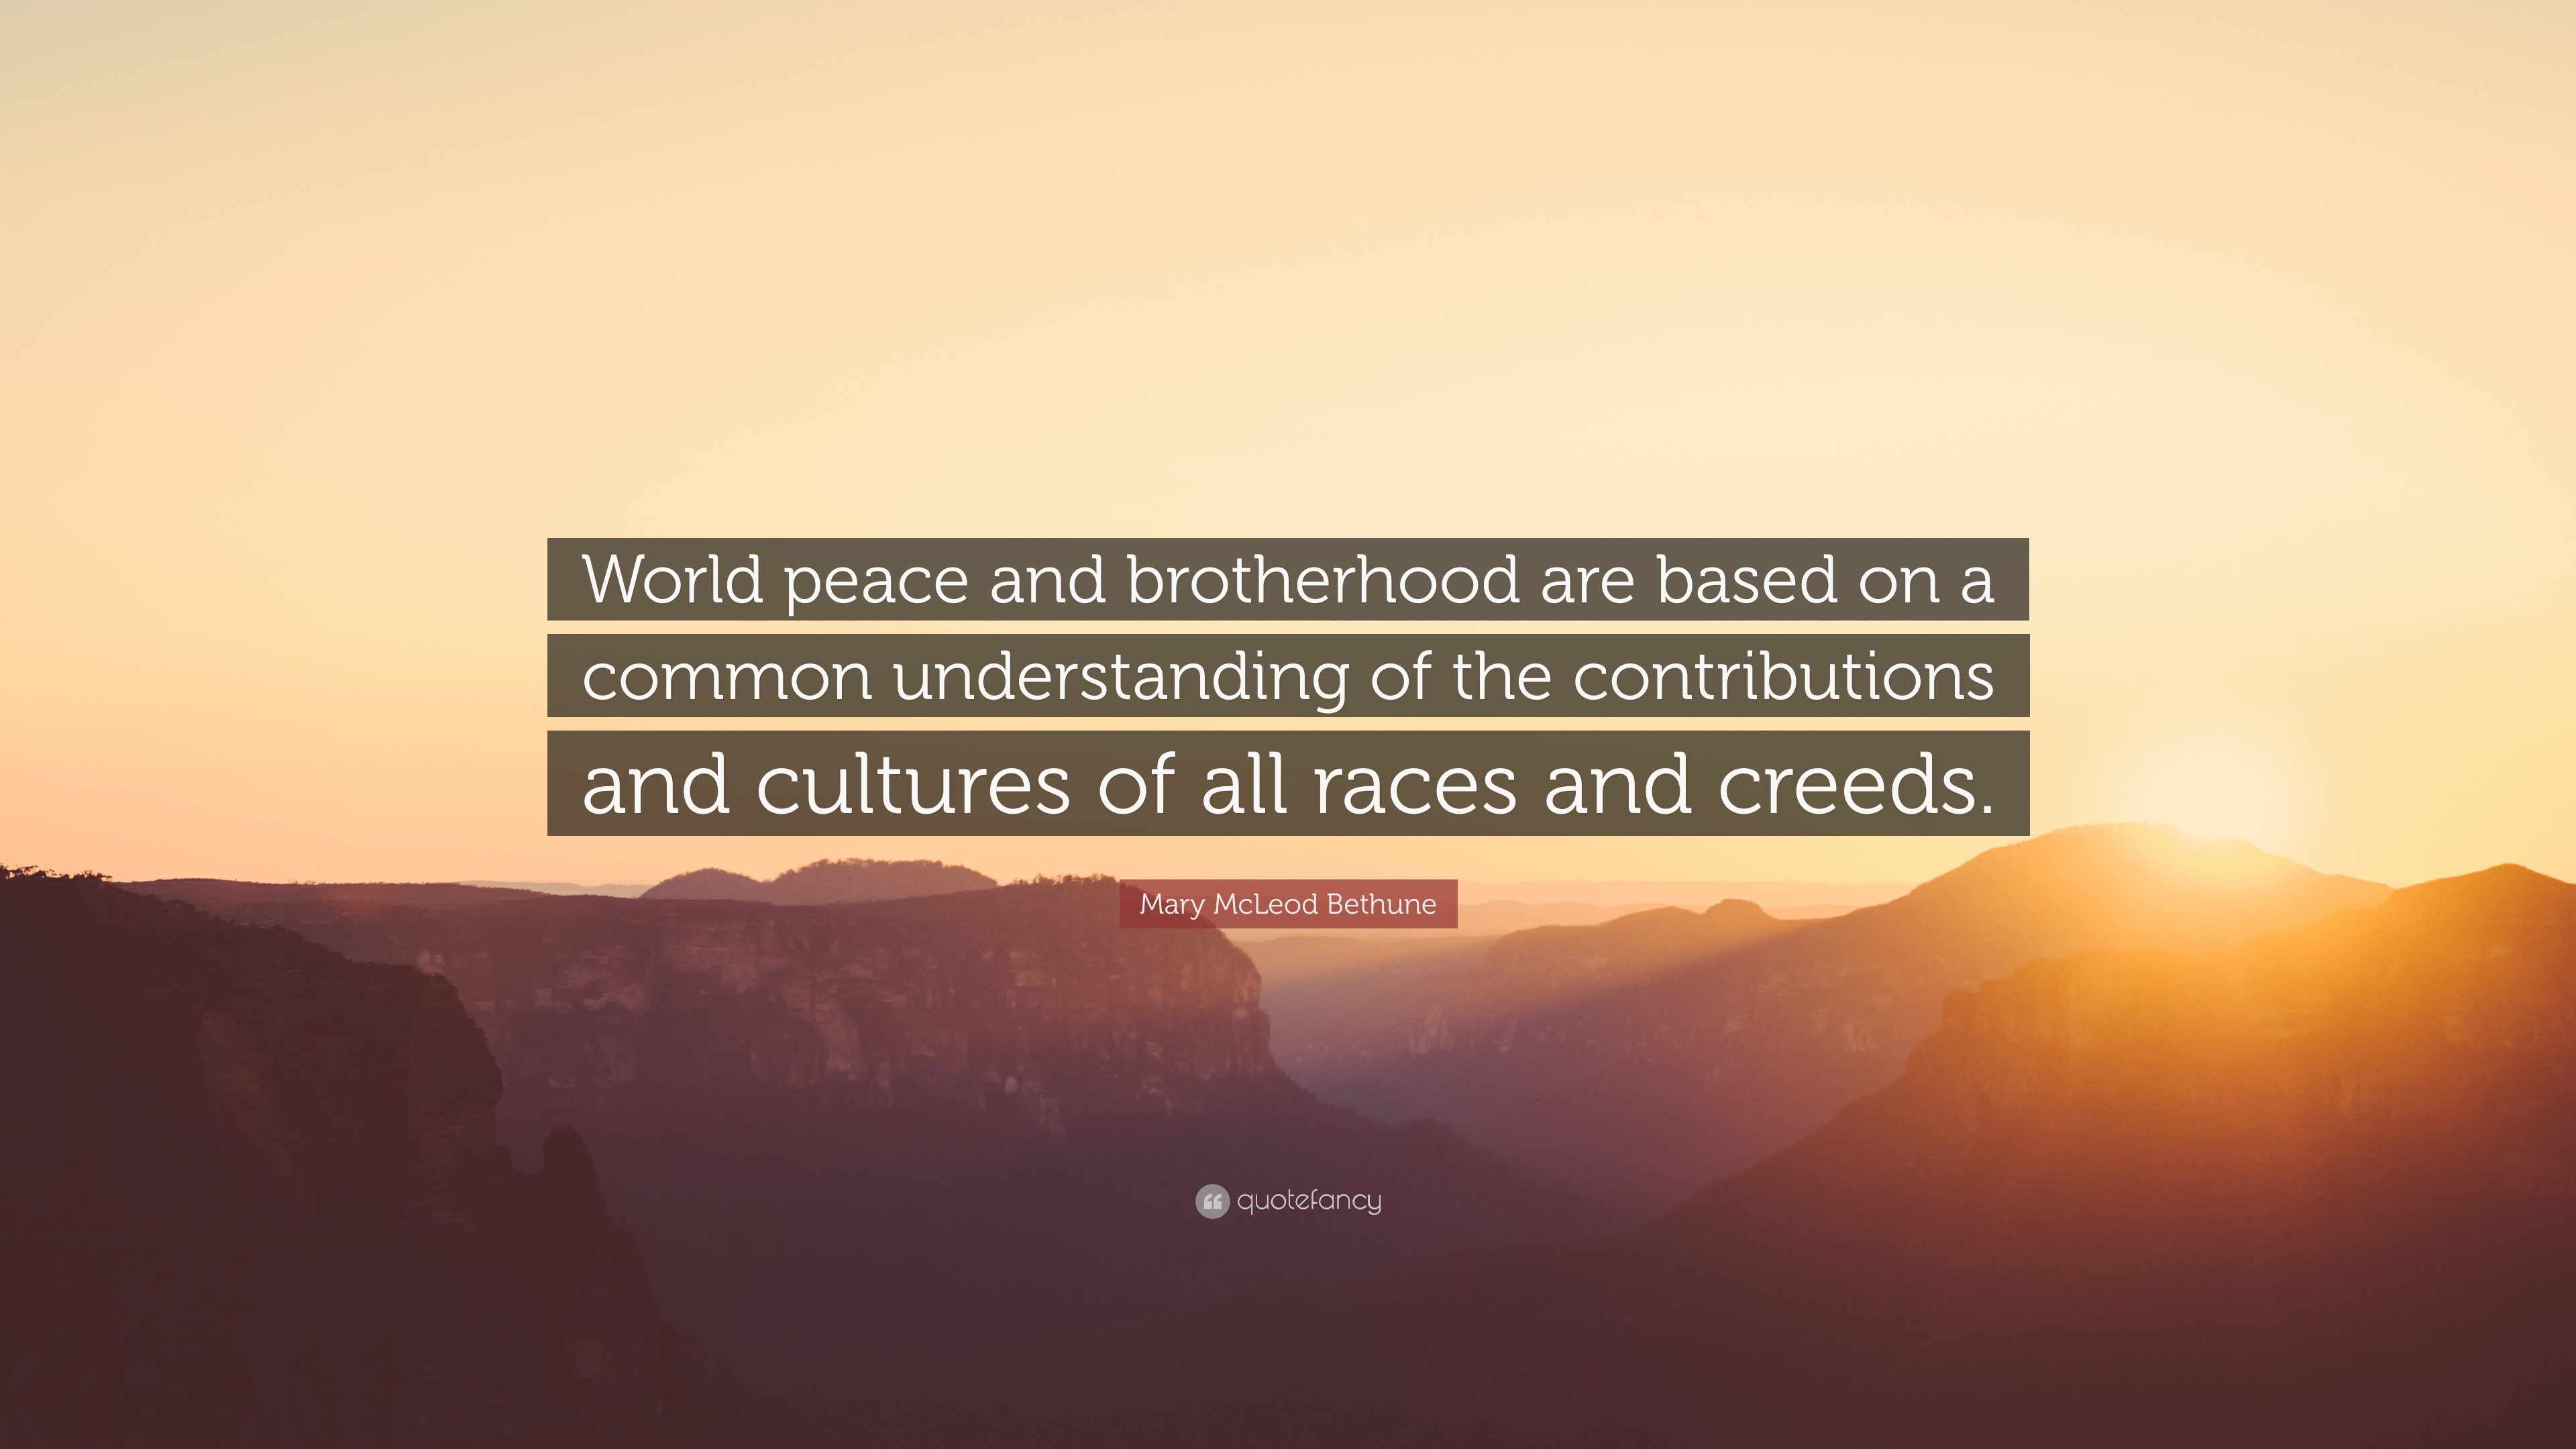 3840x2160 Mary McLeod Bethune Quote: “World peace and brotherhood are based on a  common understanding